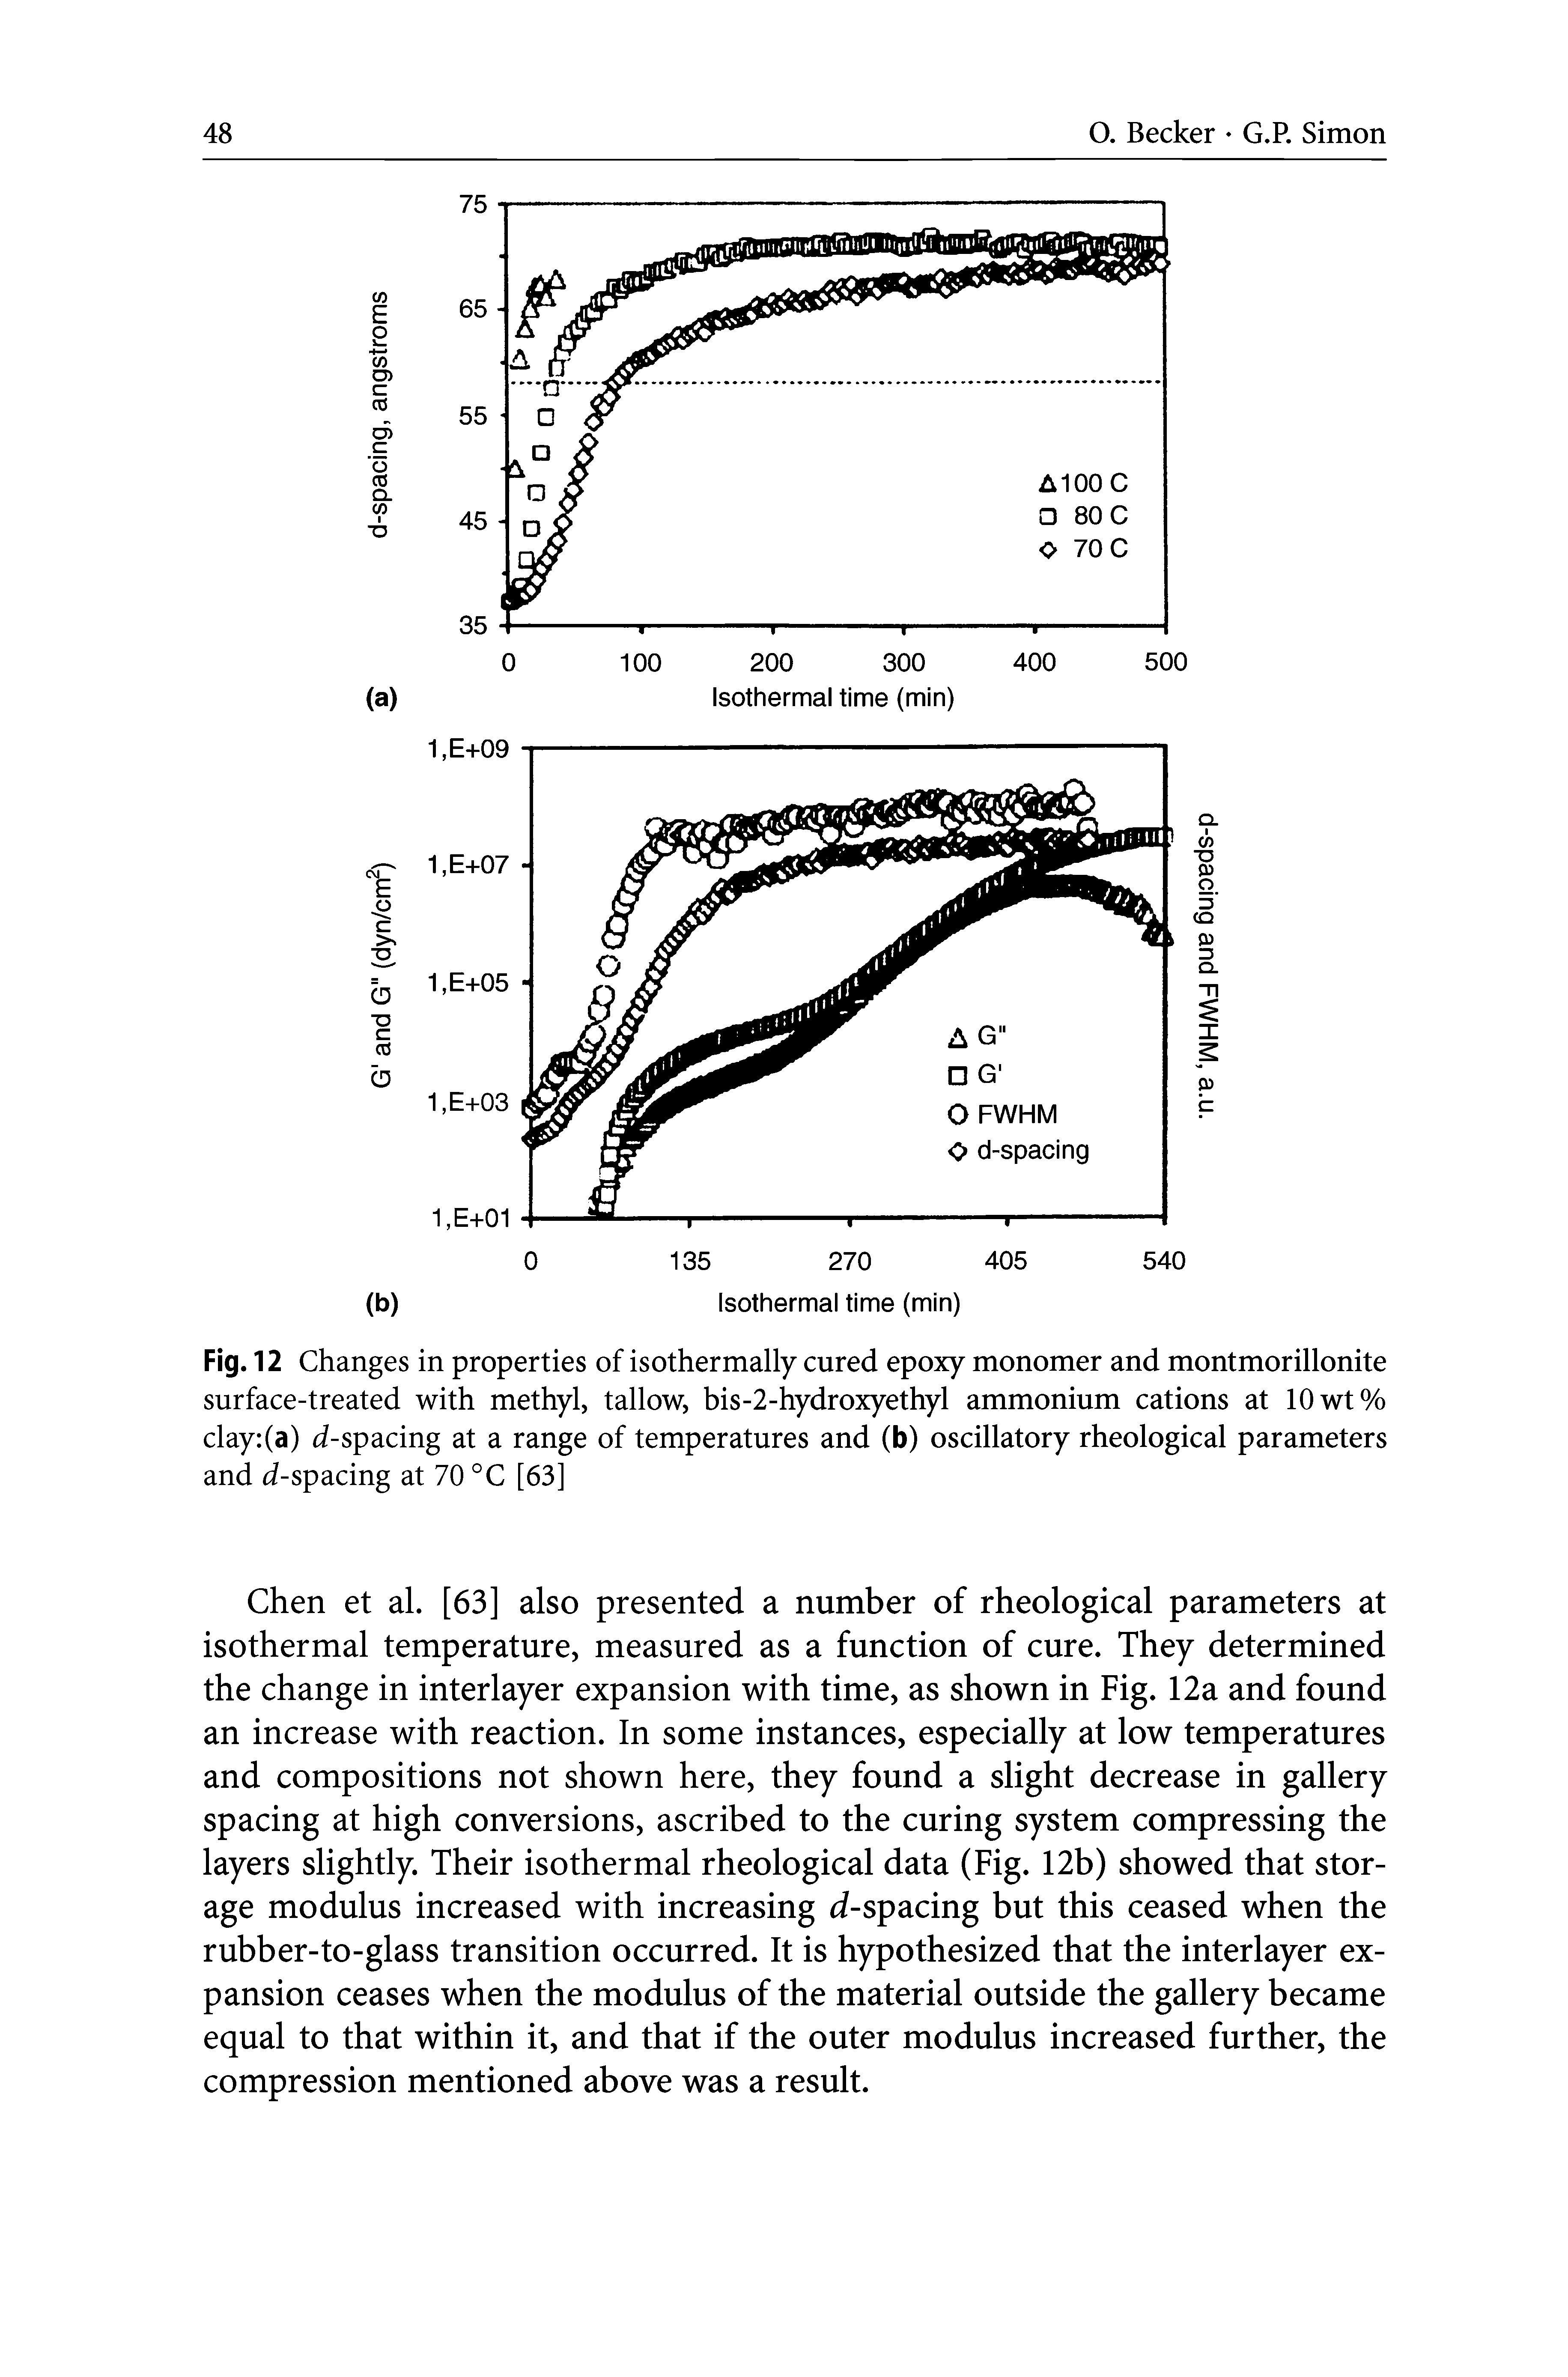 Fig. 12 Changes in properties of isothermally cured epoxy monomer and montmorillonite surface-treated with methyl, tallow, bis-2-hydroxyethyl ammonium cations at 10wt% clay (a) d-spacing at a range of temperatures and (b) oscillatory rheological parameters and d-spacing at 70 °C [63]...